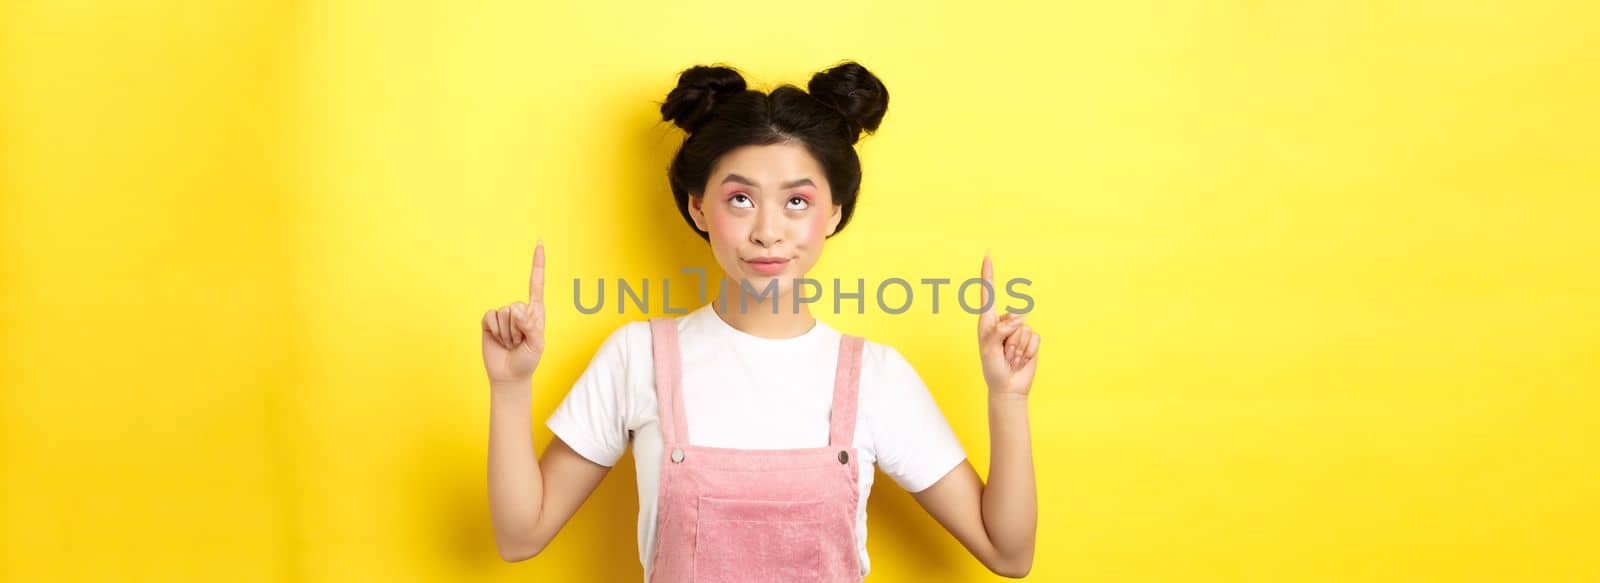 Glamour asian girl with beauty makeup, pointing fingers up, showing top advertisement, standing on yellow background.